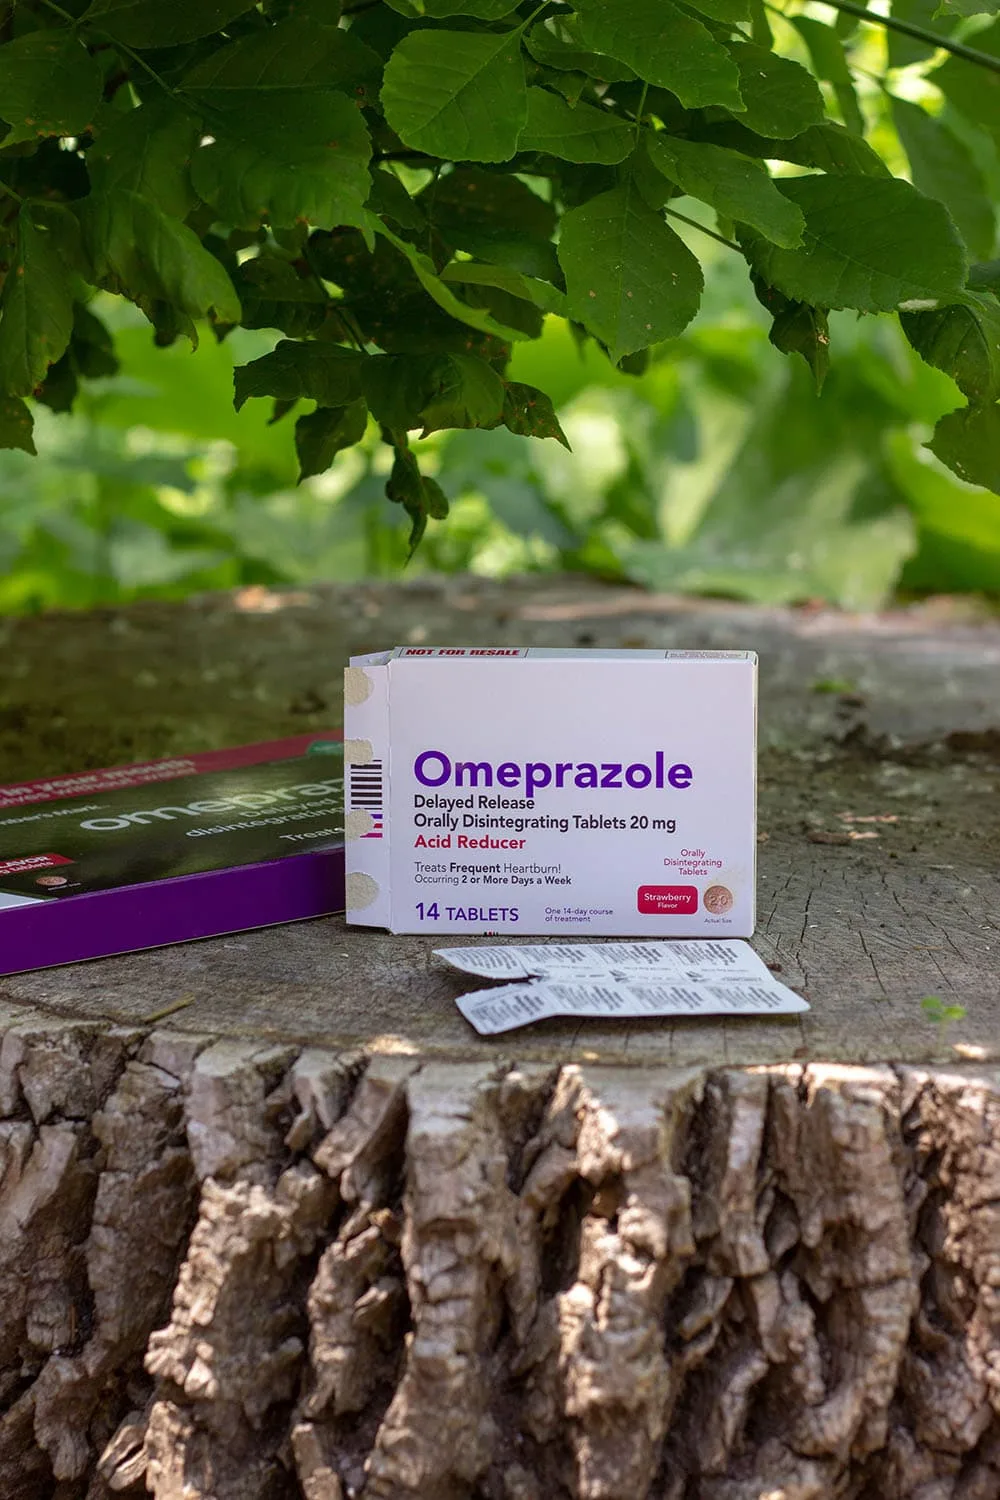 Omeprazole package sitting on a tree stump under leaves. 